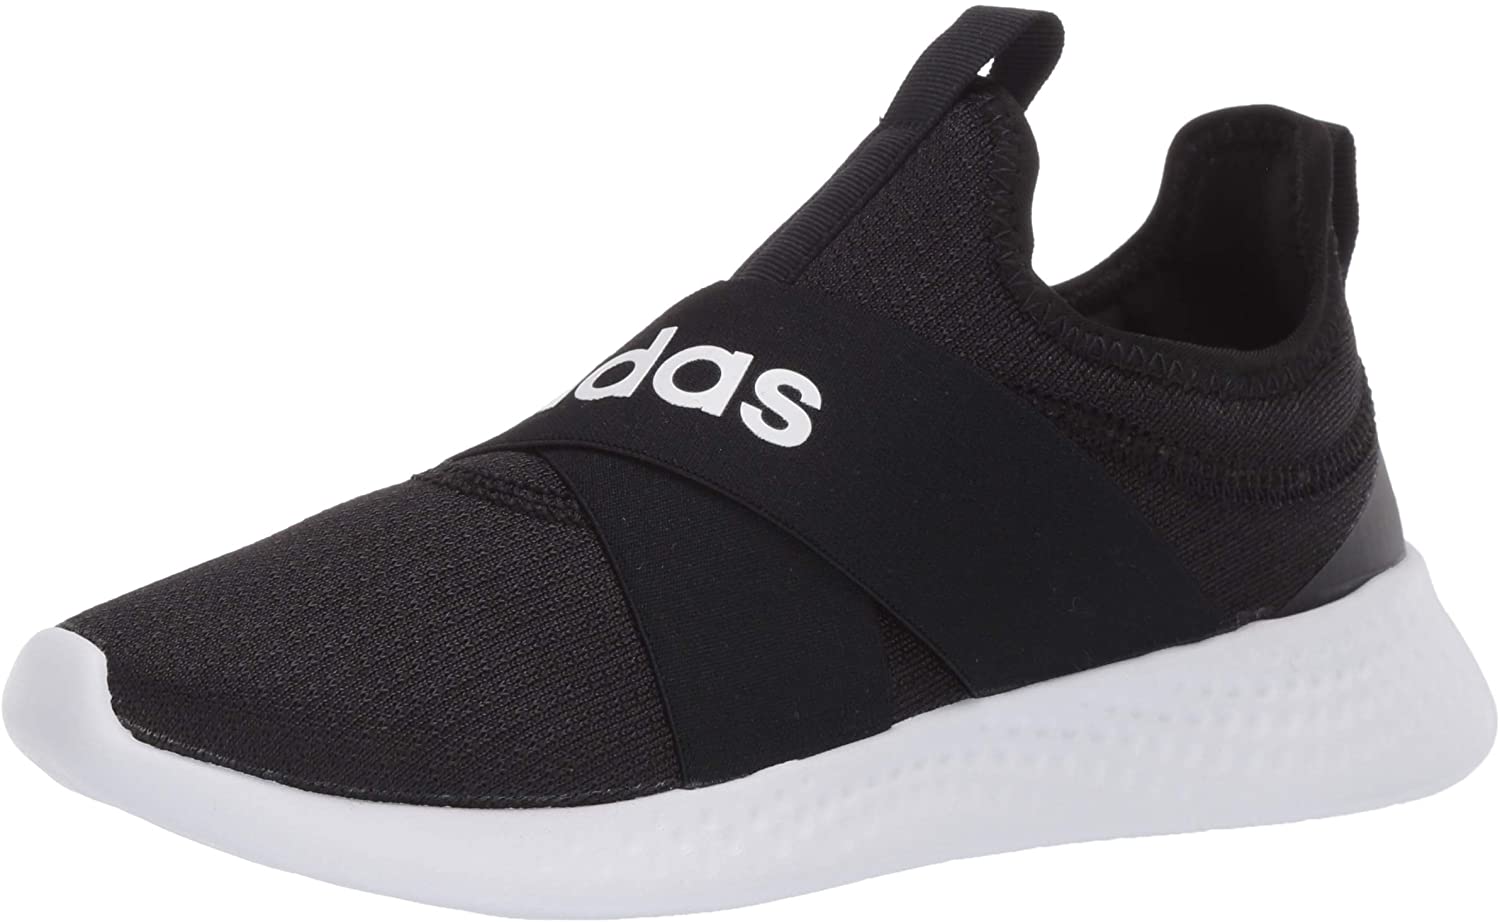 adidas Womens Puremotion Adapt Running Shoes - Core Black / Cloud White / Grey Five - 6.5